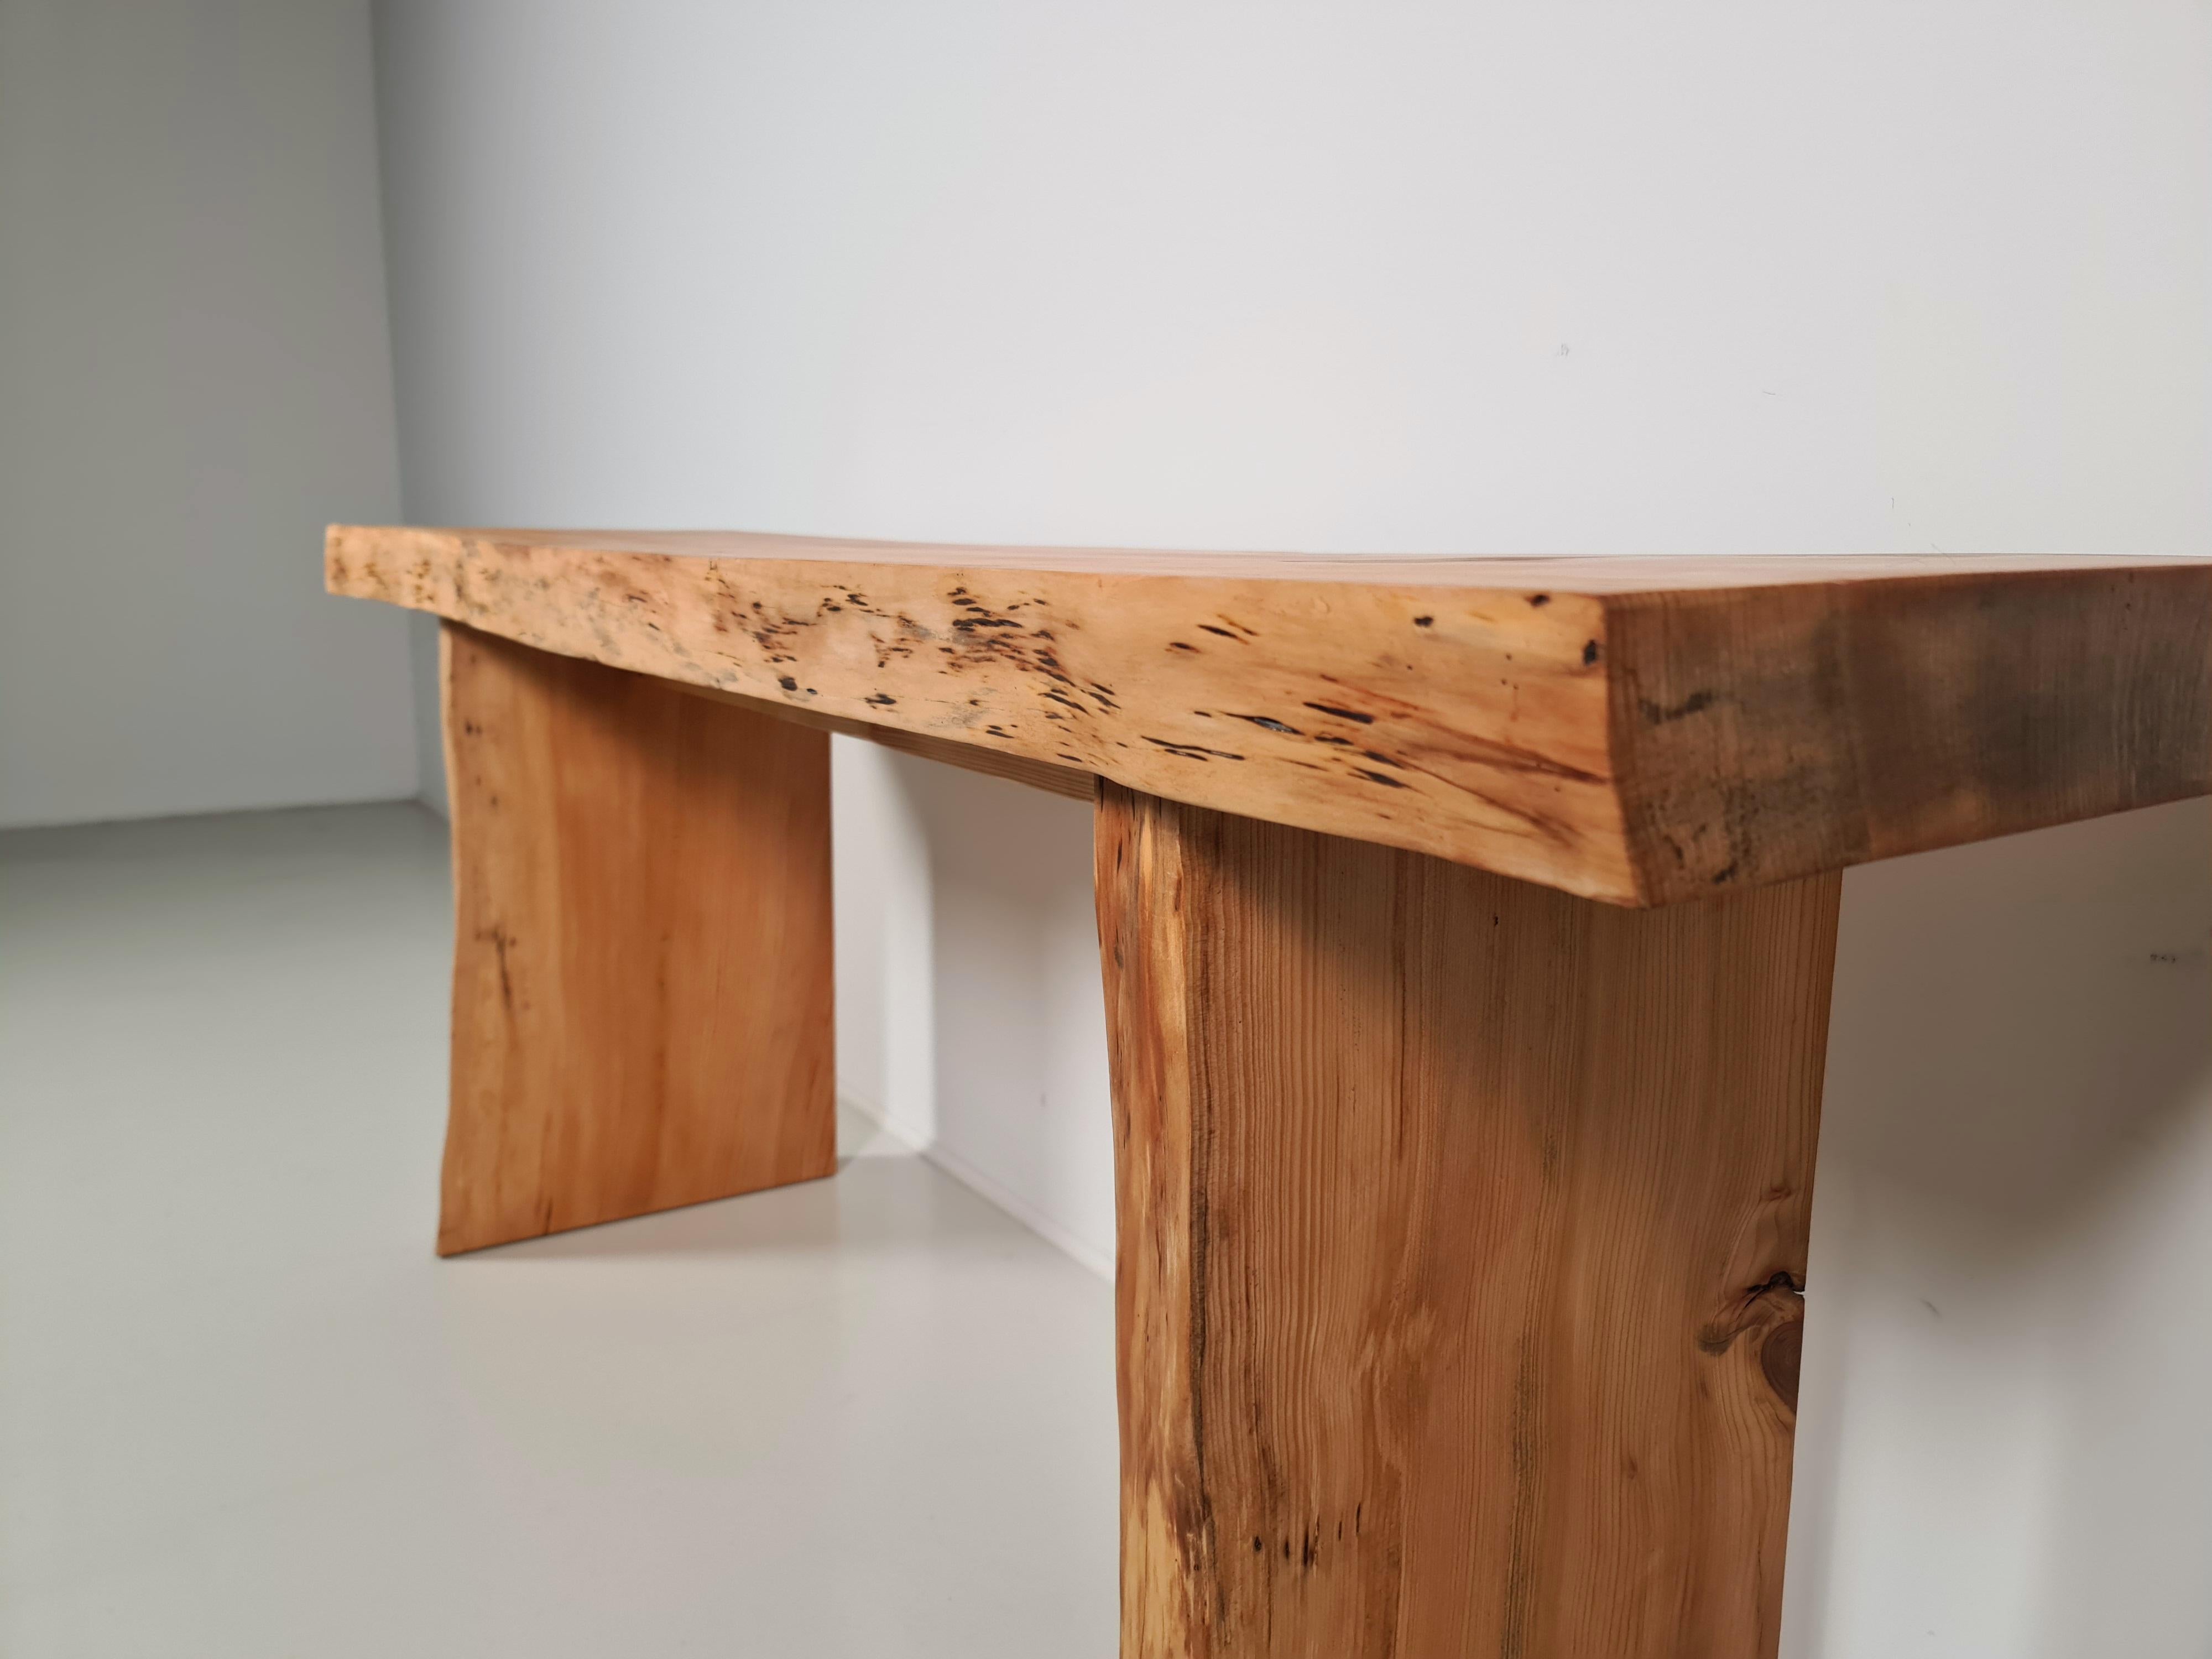 Pine wood console table, France, 1970s

Console table in the style of Pierre Chapo. Strong and simplified design which clearly emerges the woods grain and natural look. The rectangular tabletop, rests on a two-legged base. With characteristic